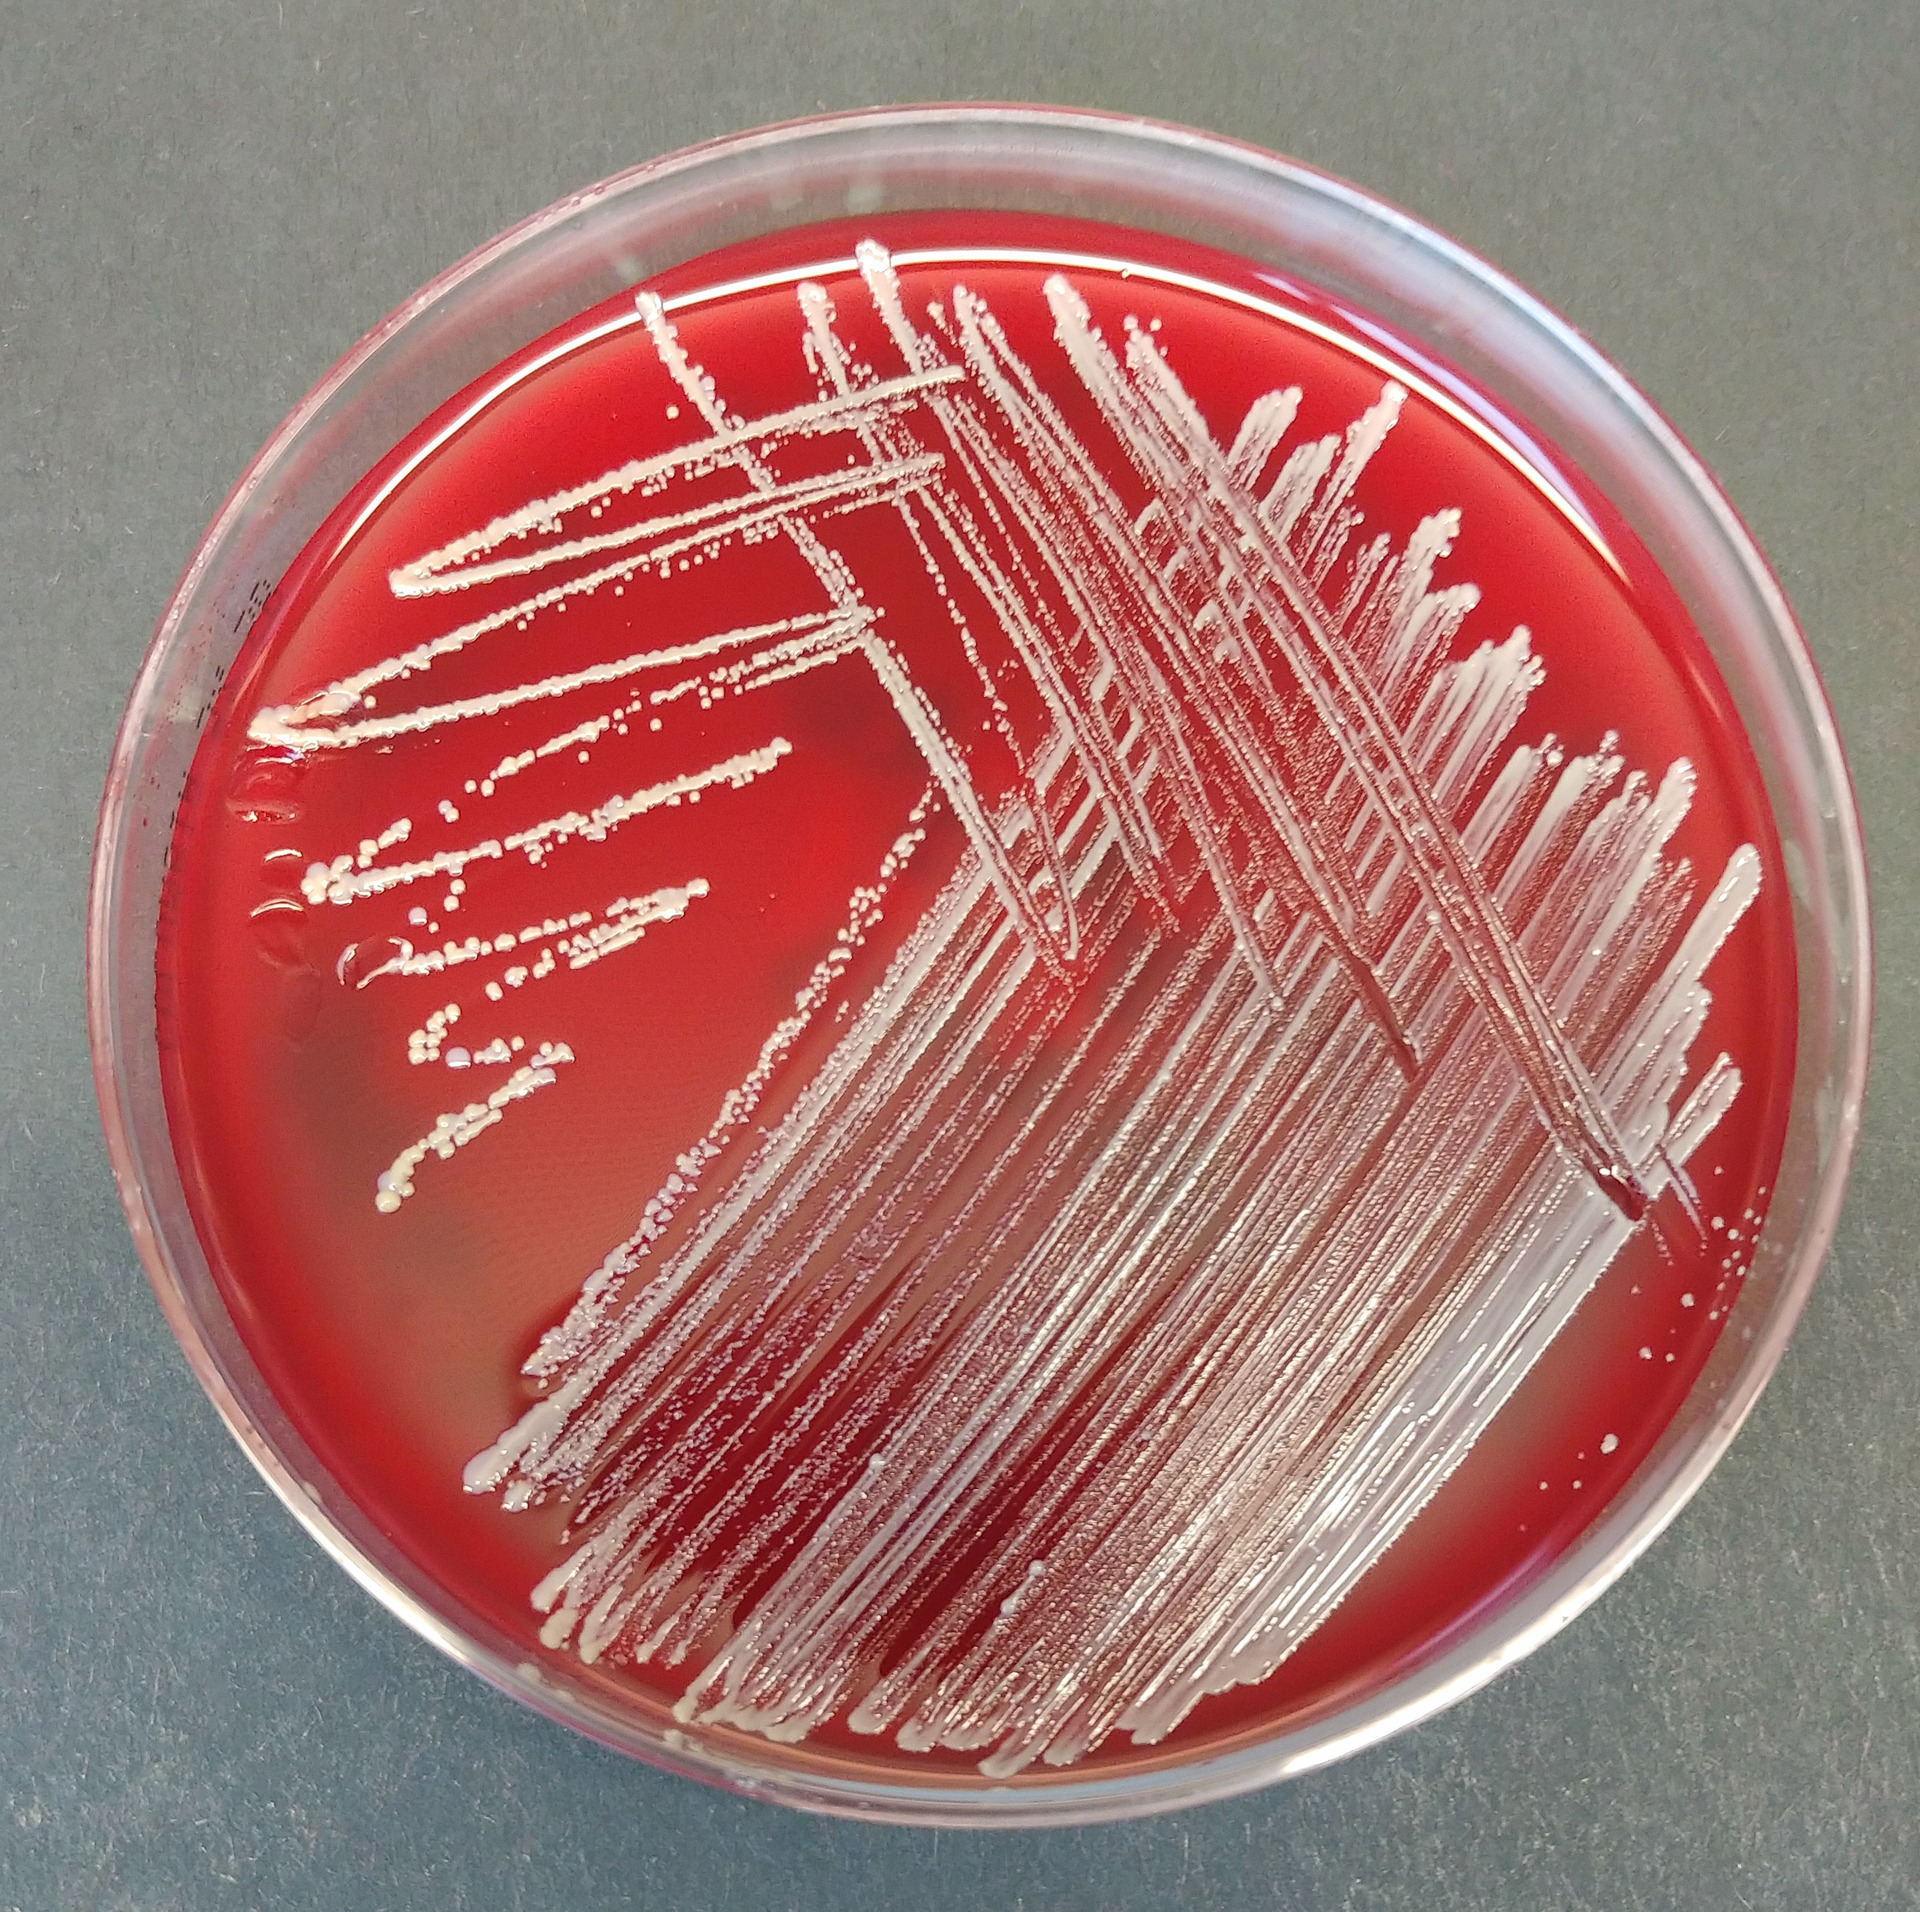 20210616_Staph_plate1.png